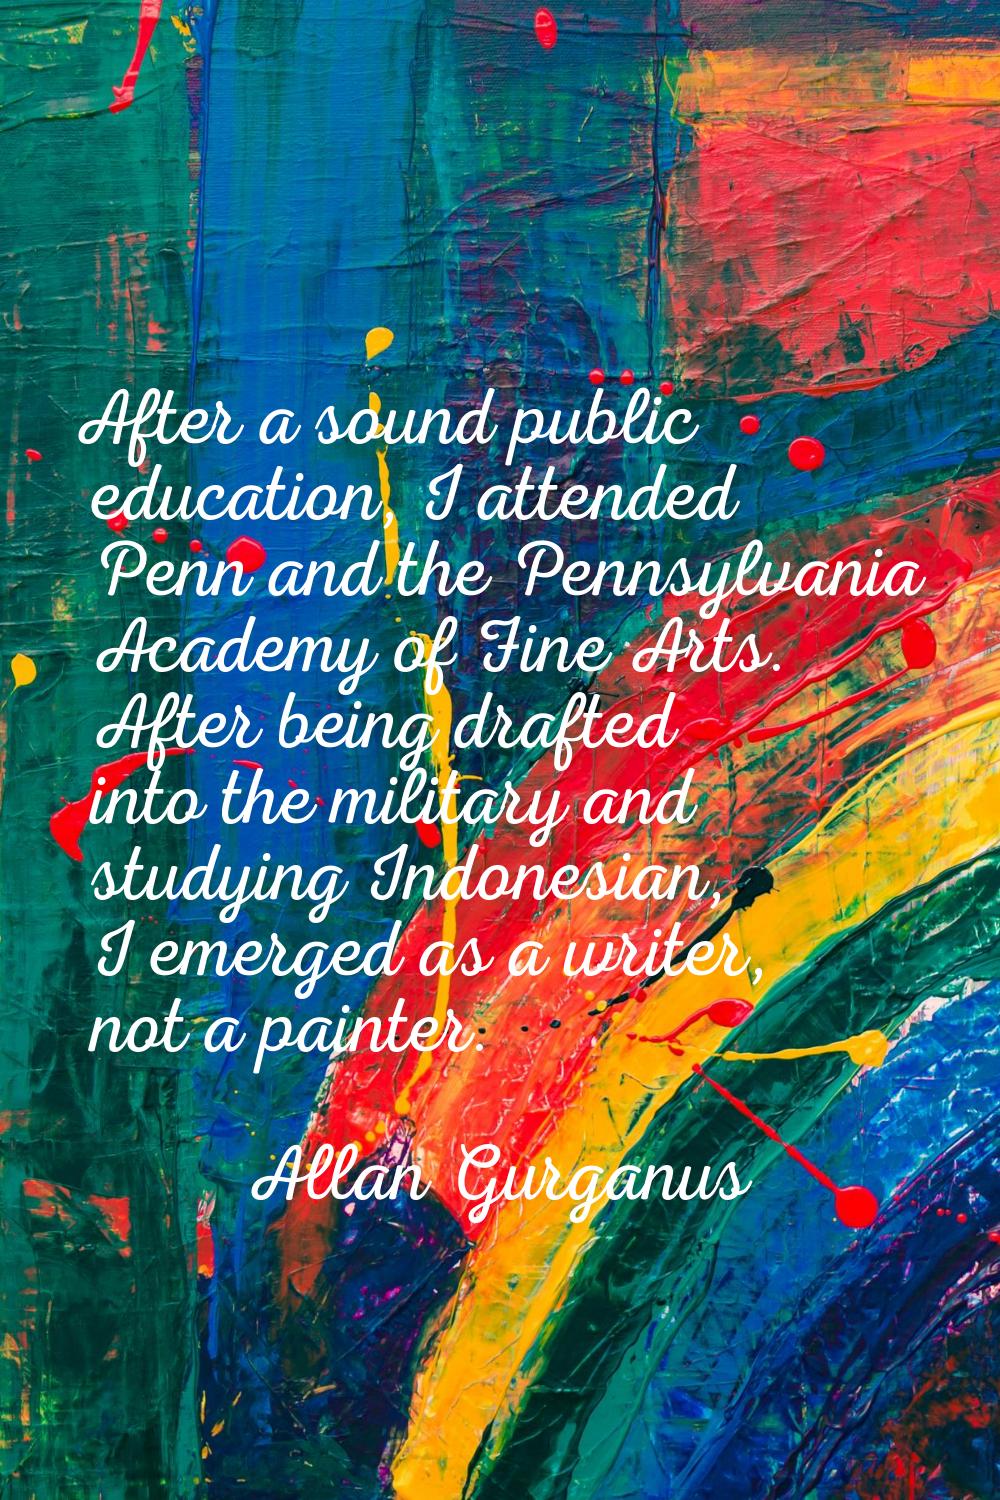 After a sound public education, I attended Penn and the Pennsylvania Academy of Fine Arts. After be